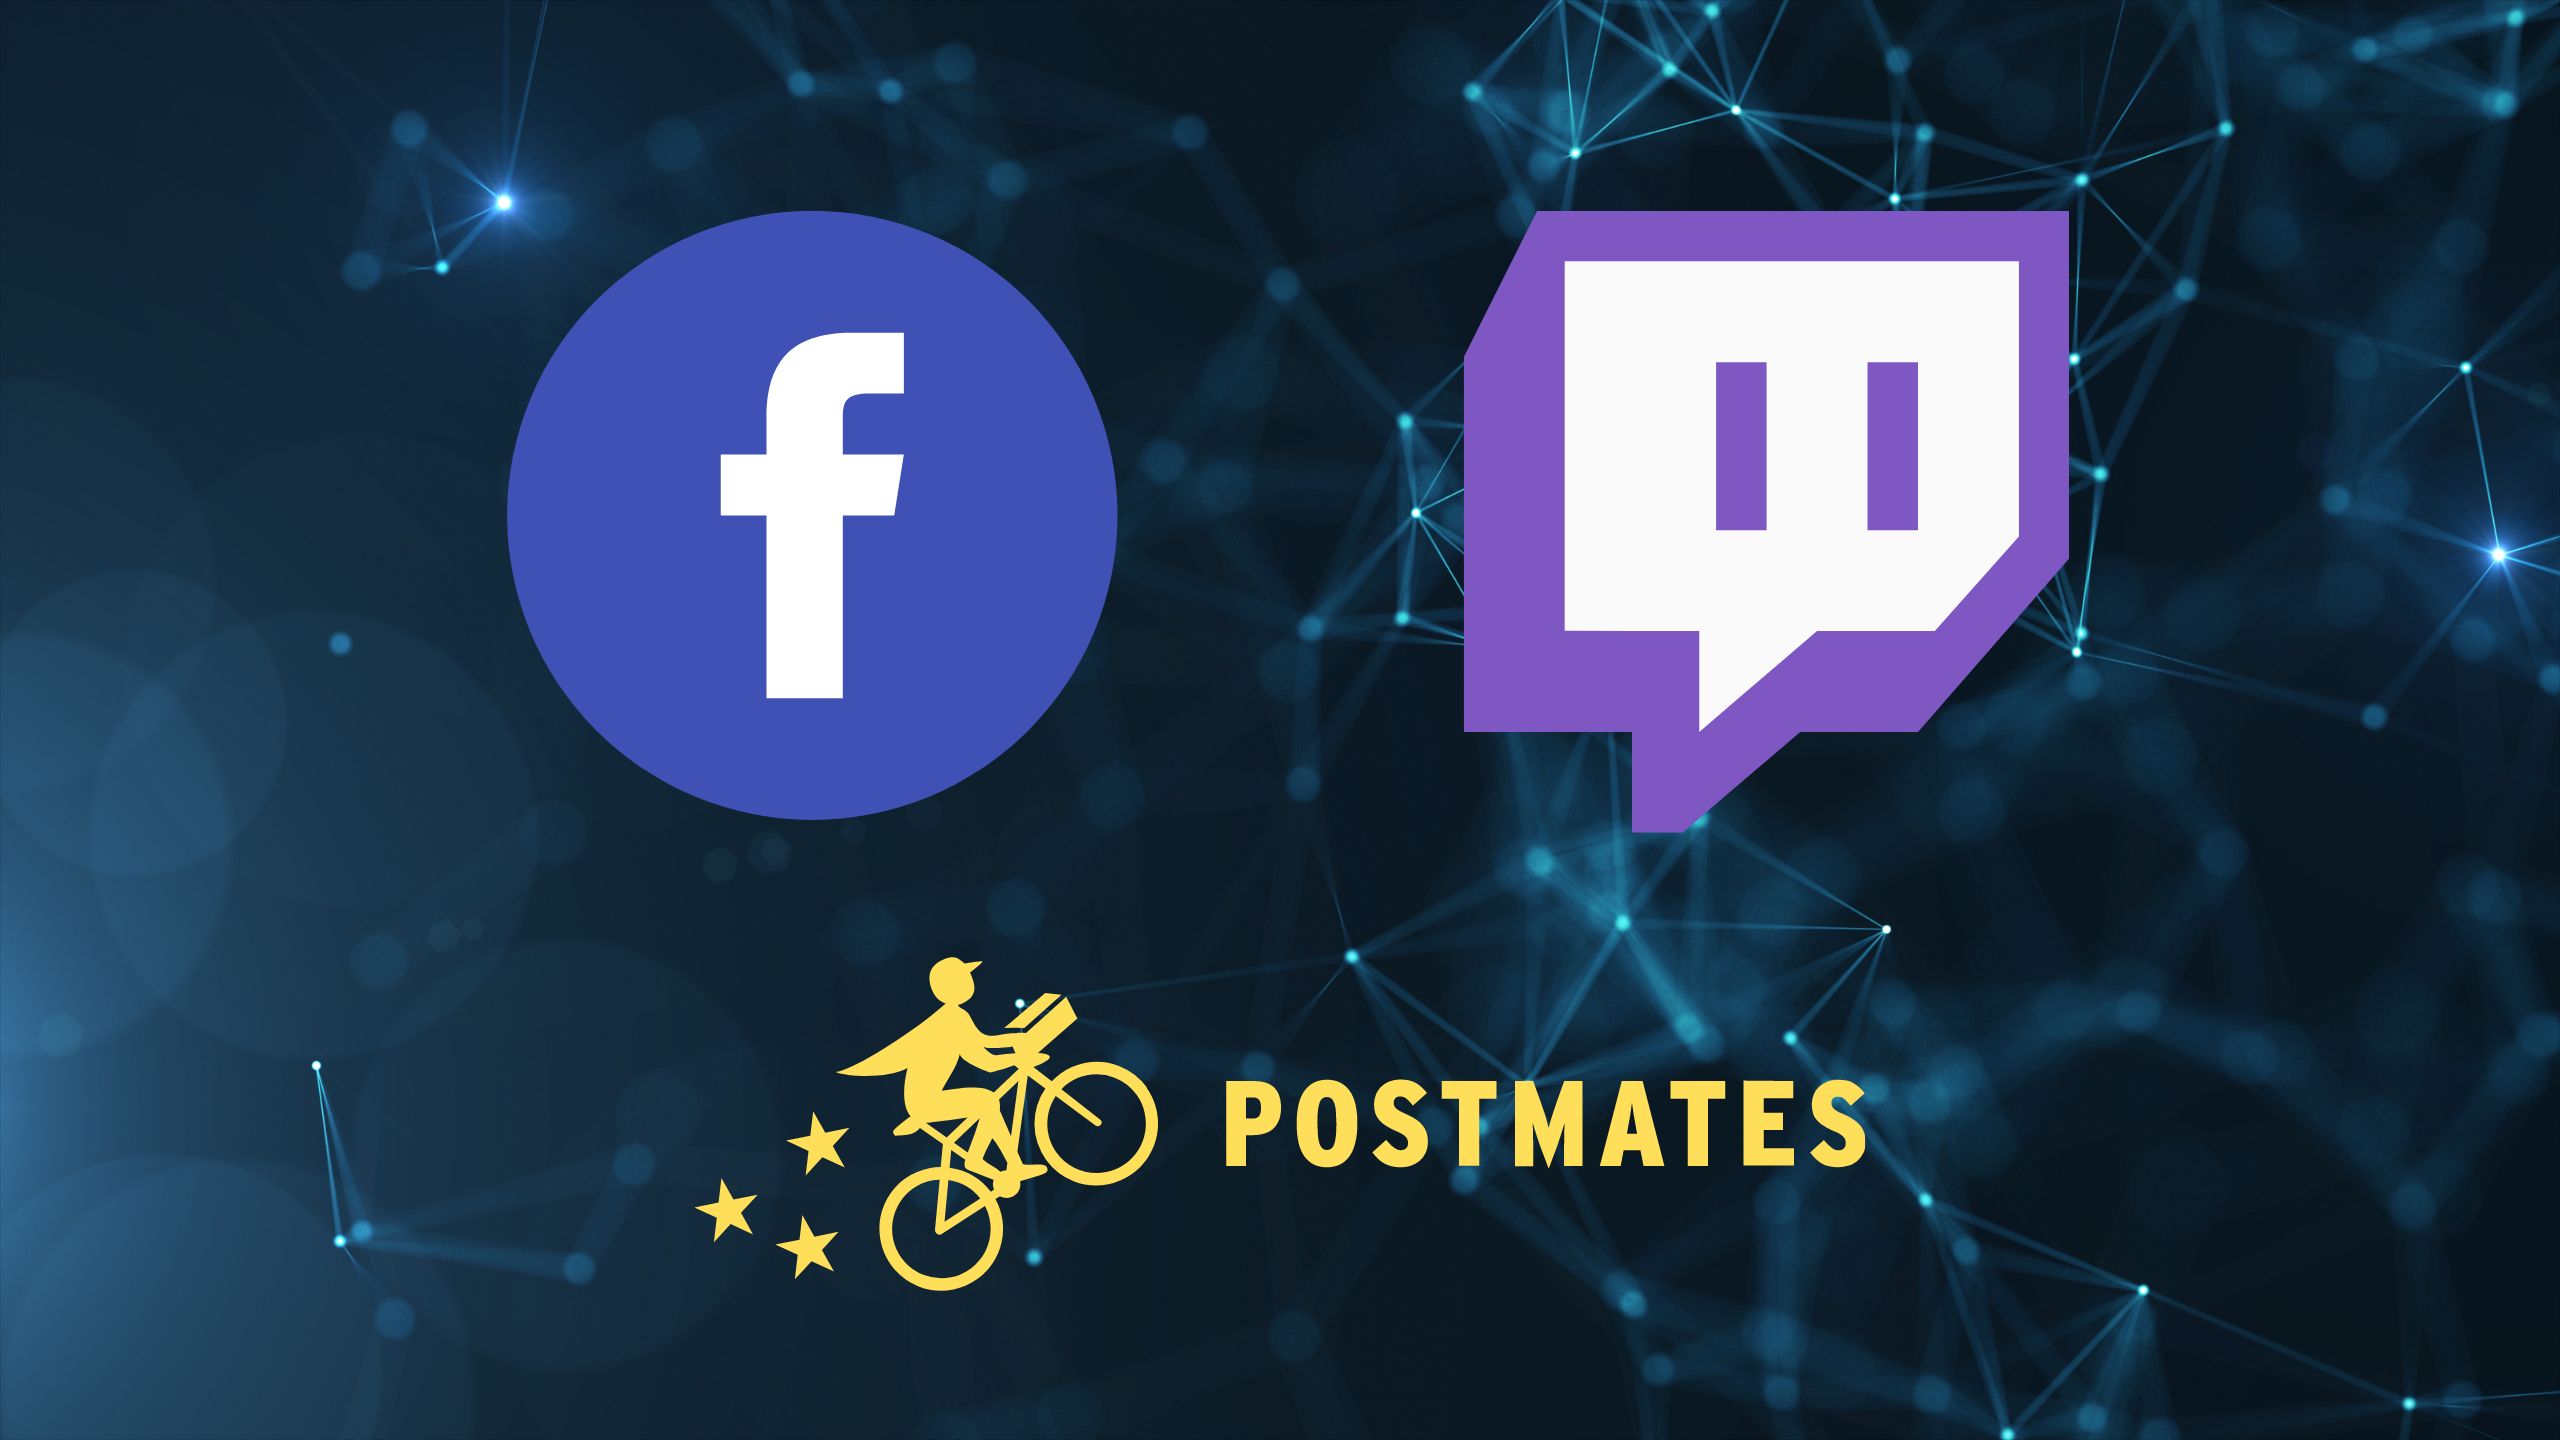 5 Data Science Interview Questions via Facebook, Twitch, and Postmates